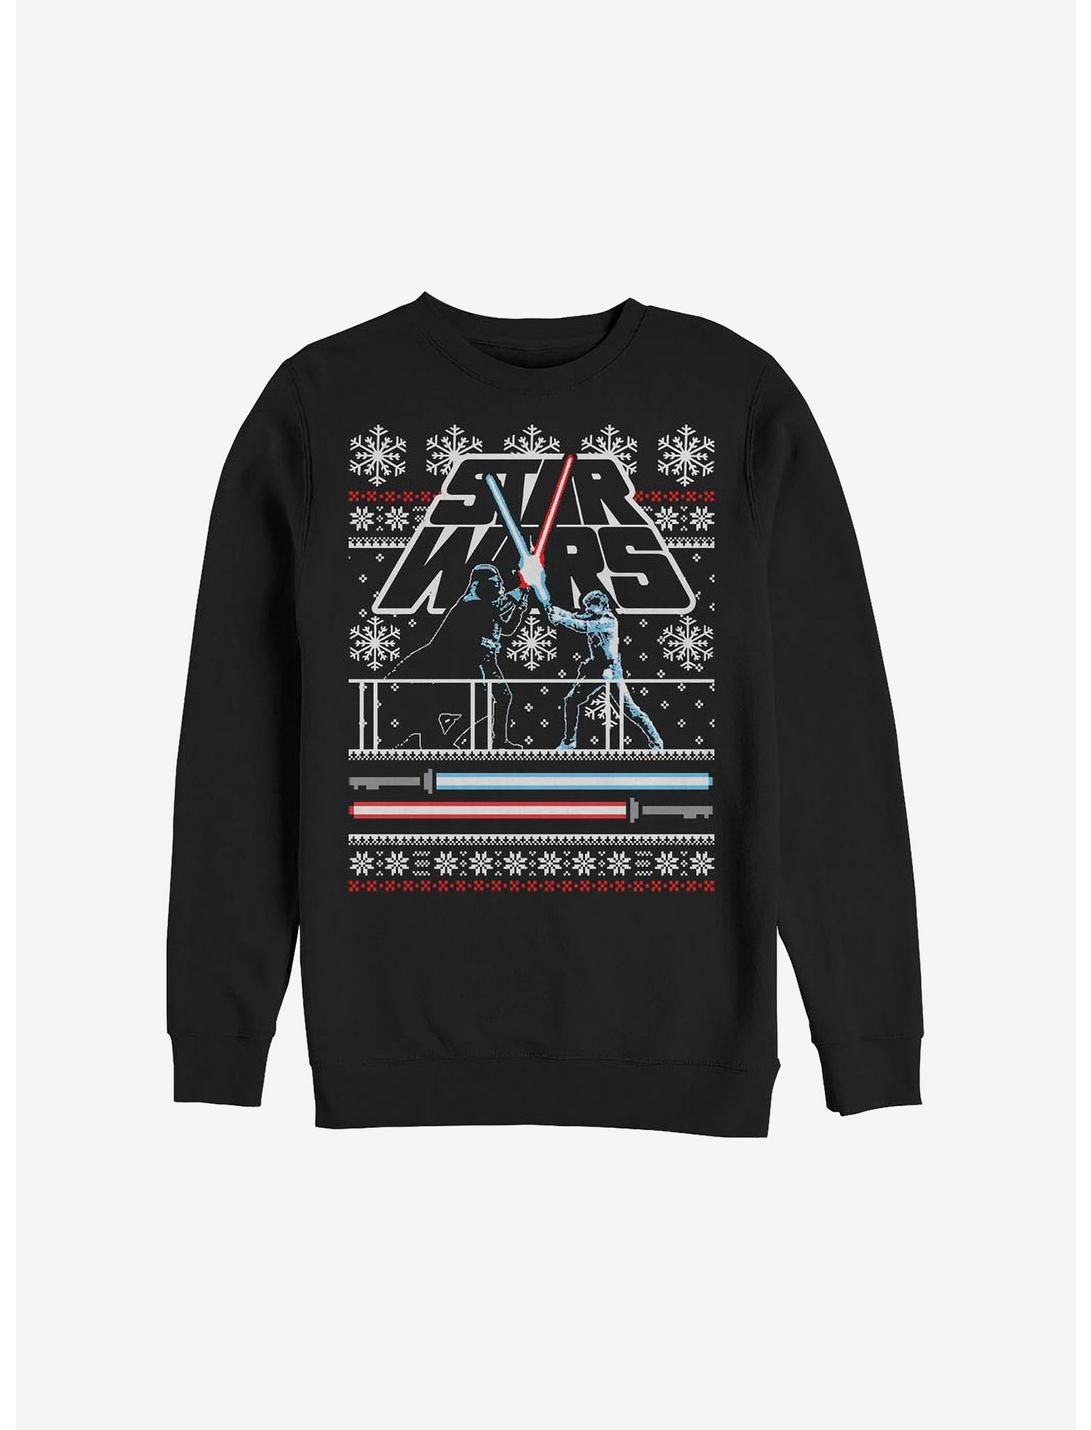 Star Wars Holiday Face Off Ugly Christmas Sweater  Sweatshirt, BLACK, hi-res